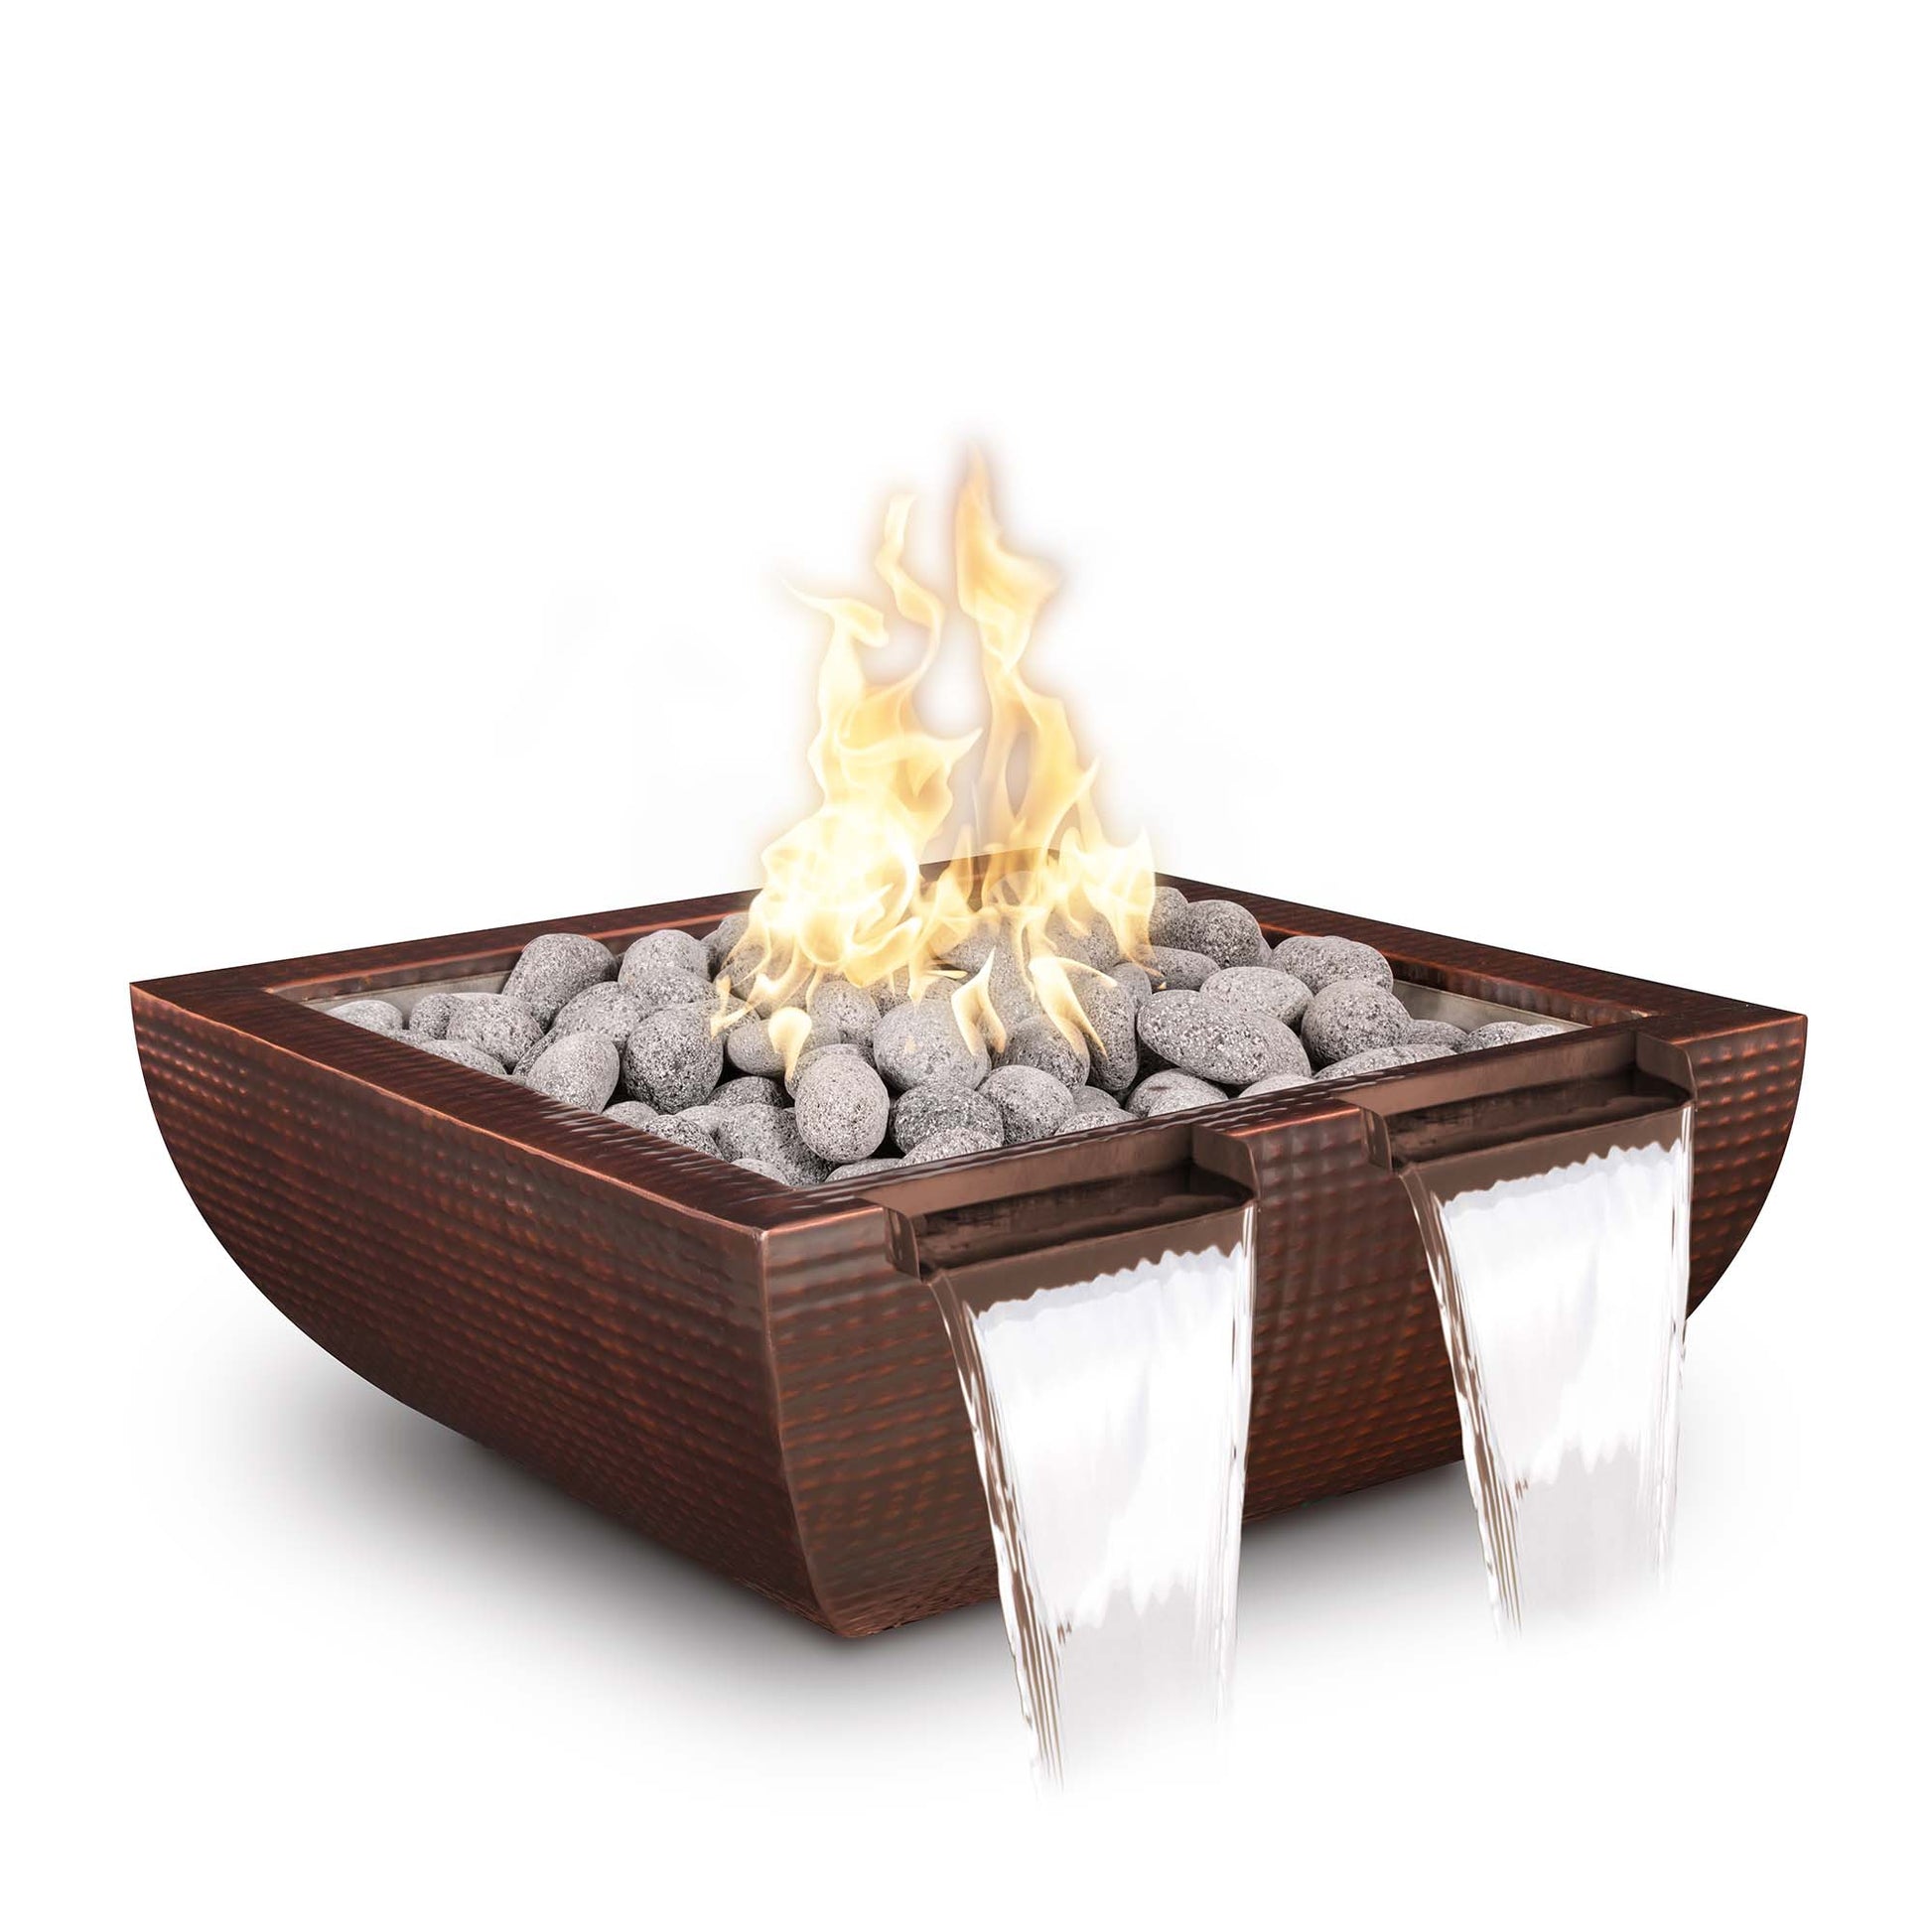 The Outdoor Plus Avalon Twin Spill 36" Copper Vein Powder Coated Metal Liquid Propane Fire & Water Bowl with 12V Electronic Ignition